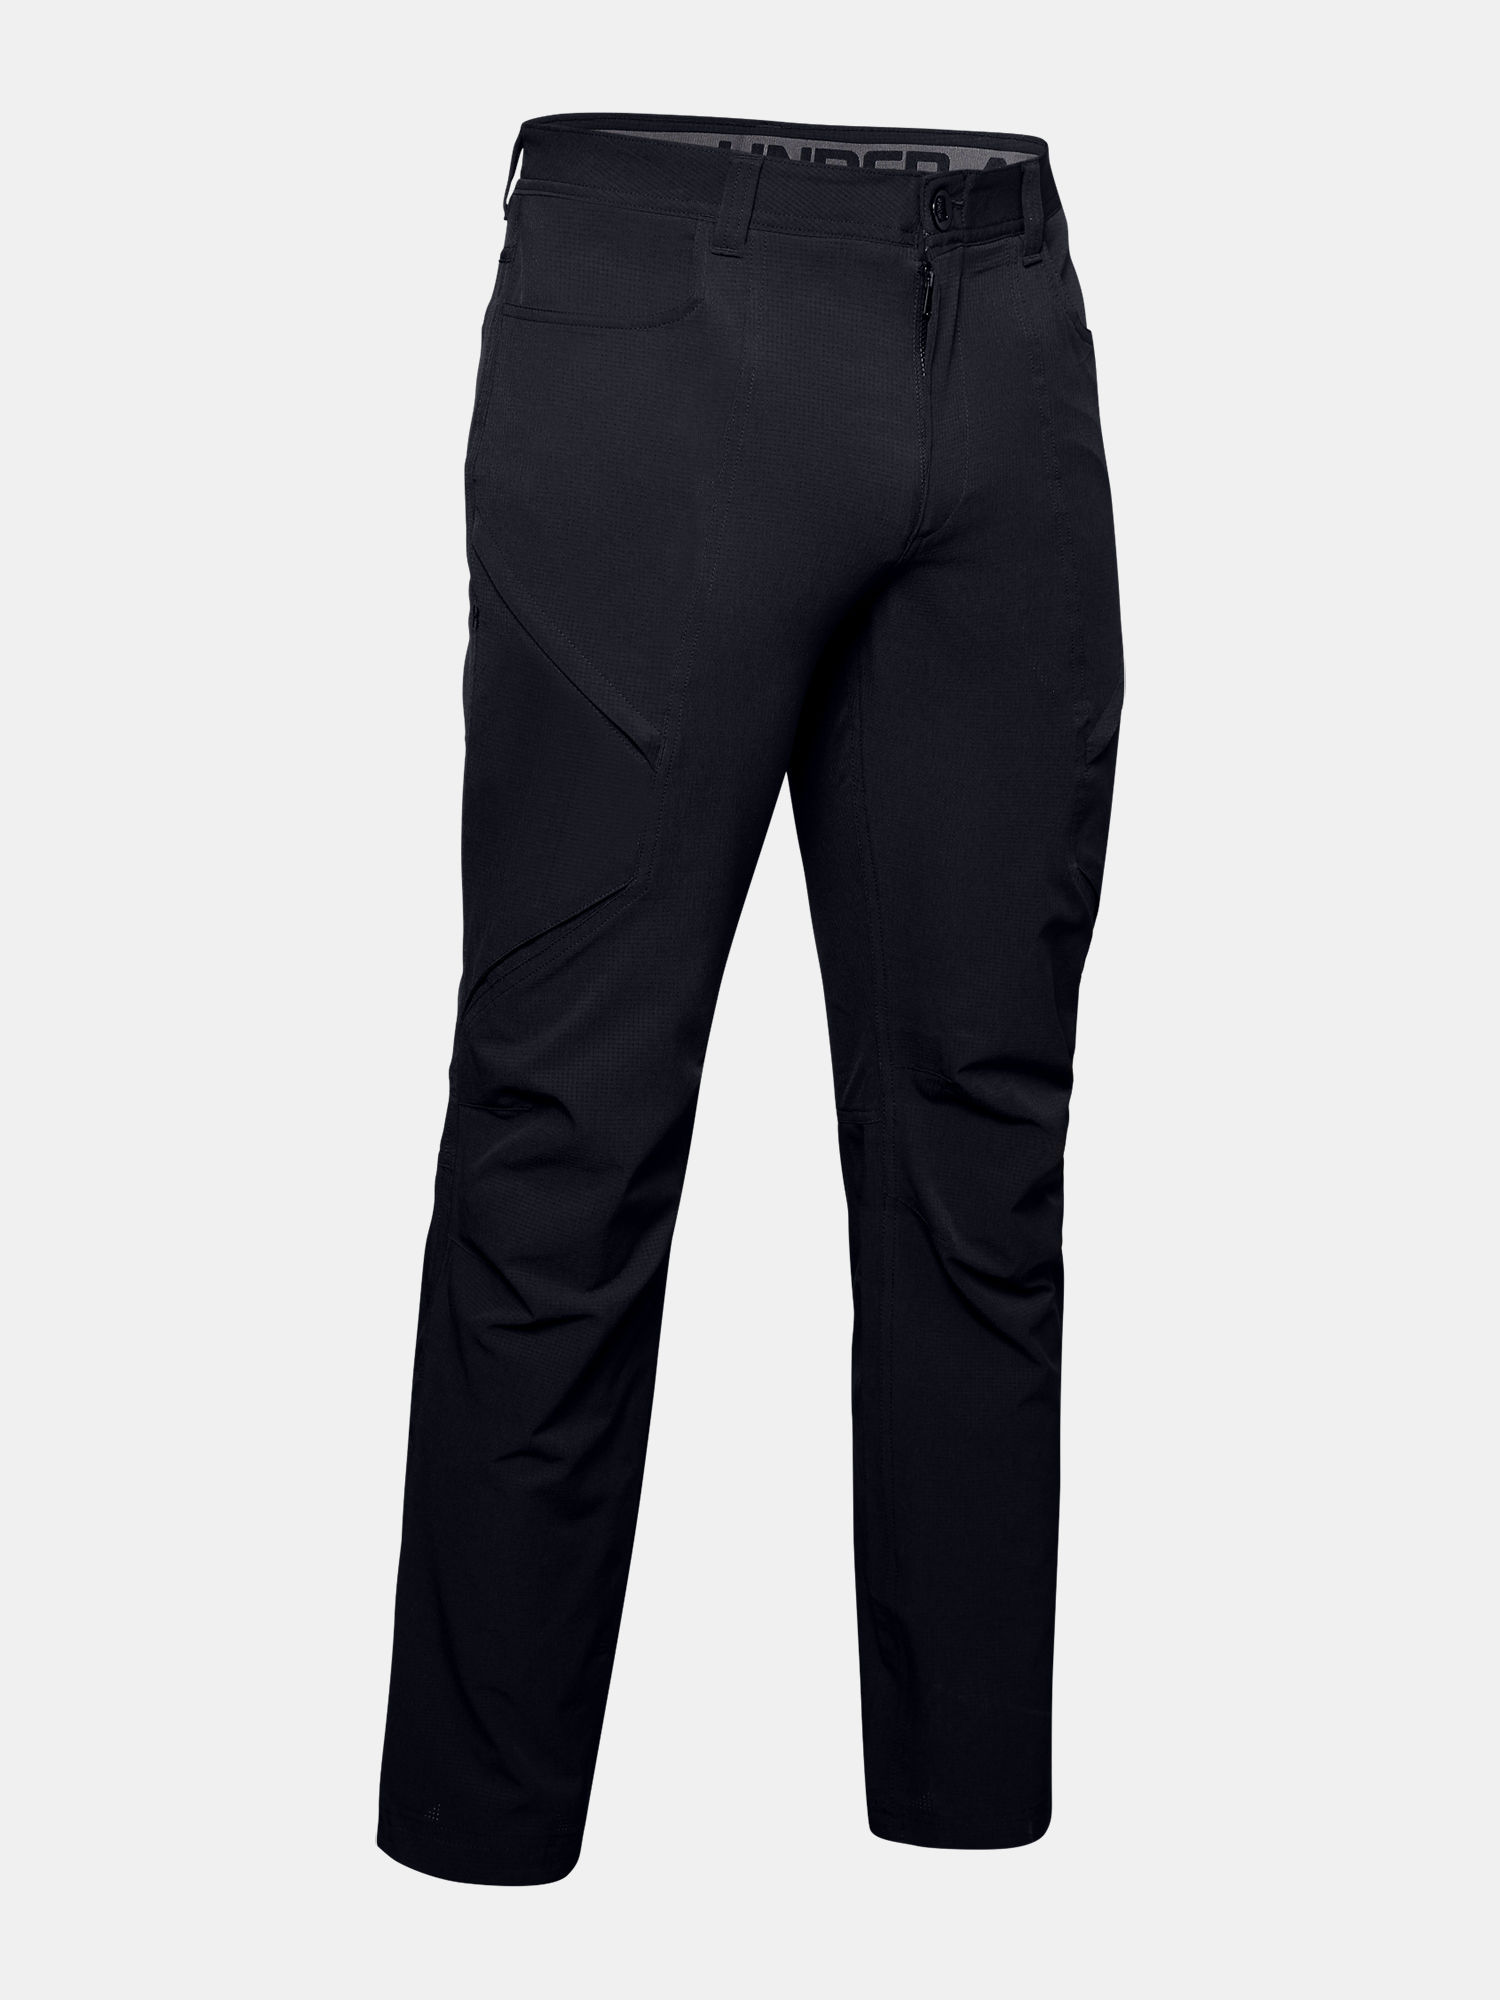 Nohavice Under Armour Adapt Pant-BLK (3)